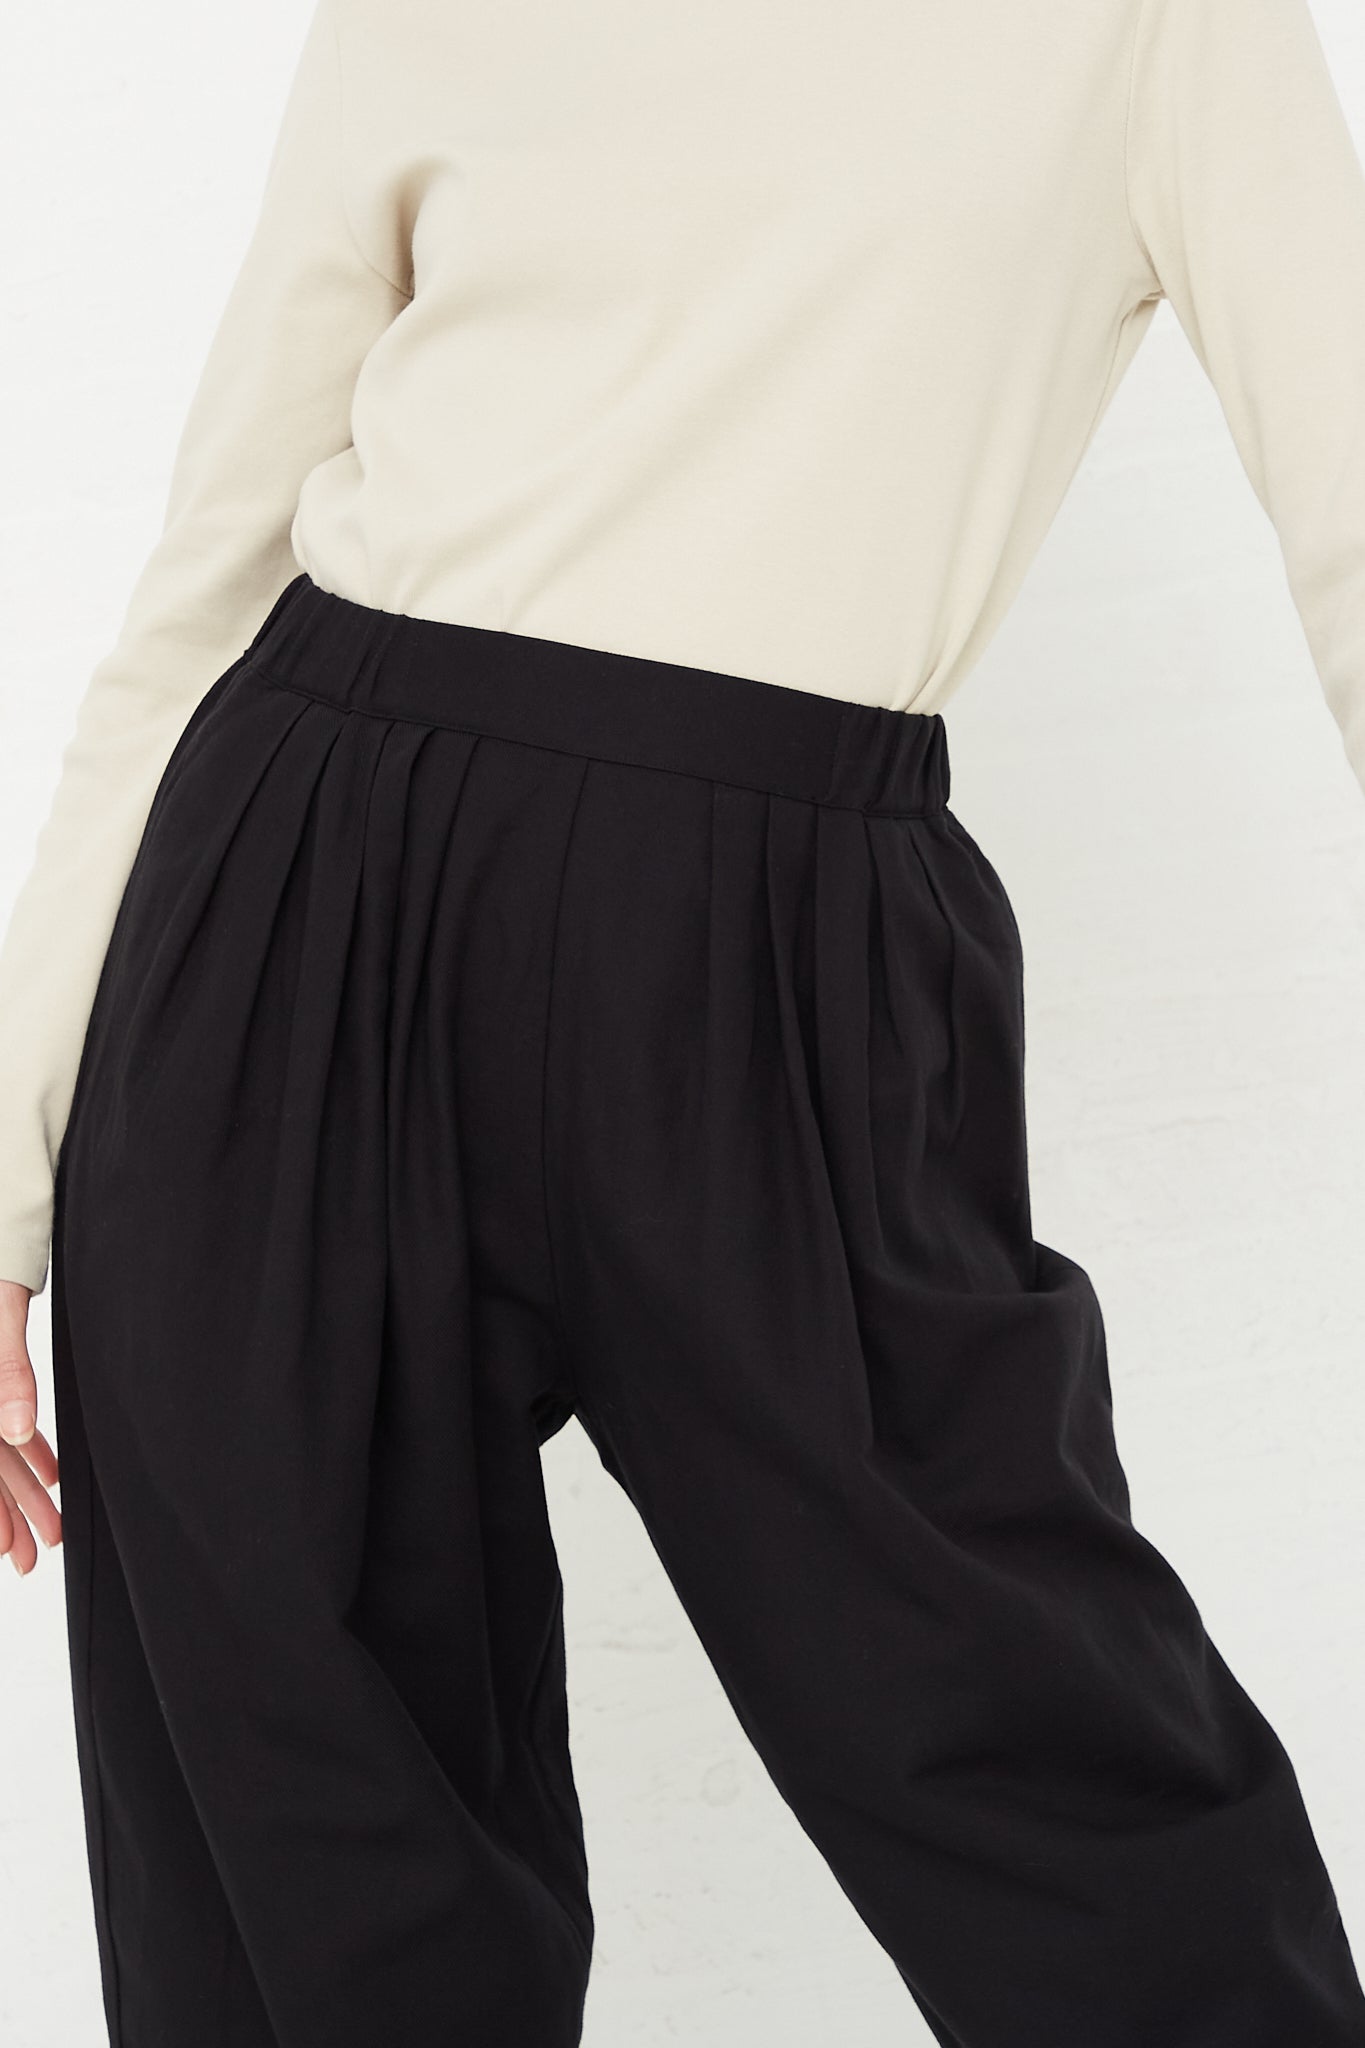 Cotton Twill Draped Pants in Black by Black Crane for Oroboro Upclose